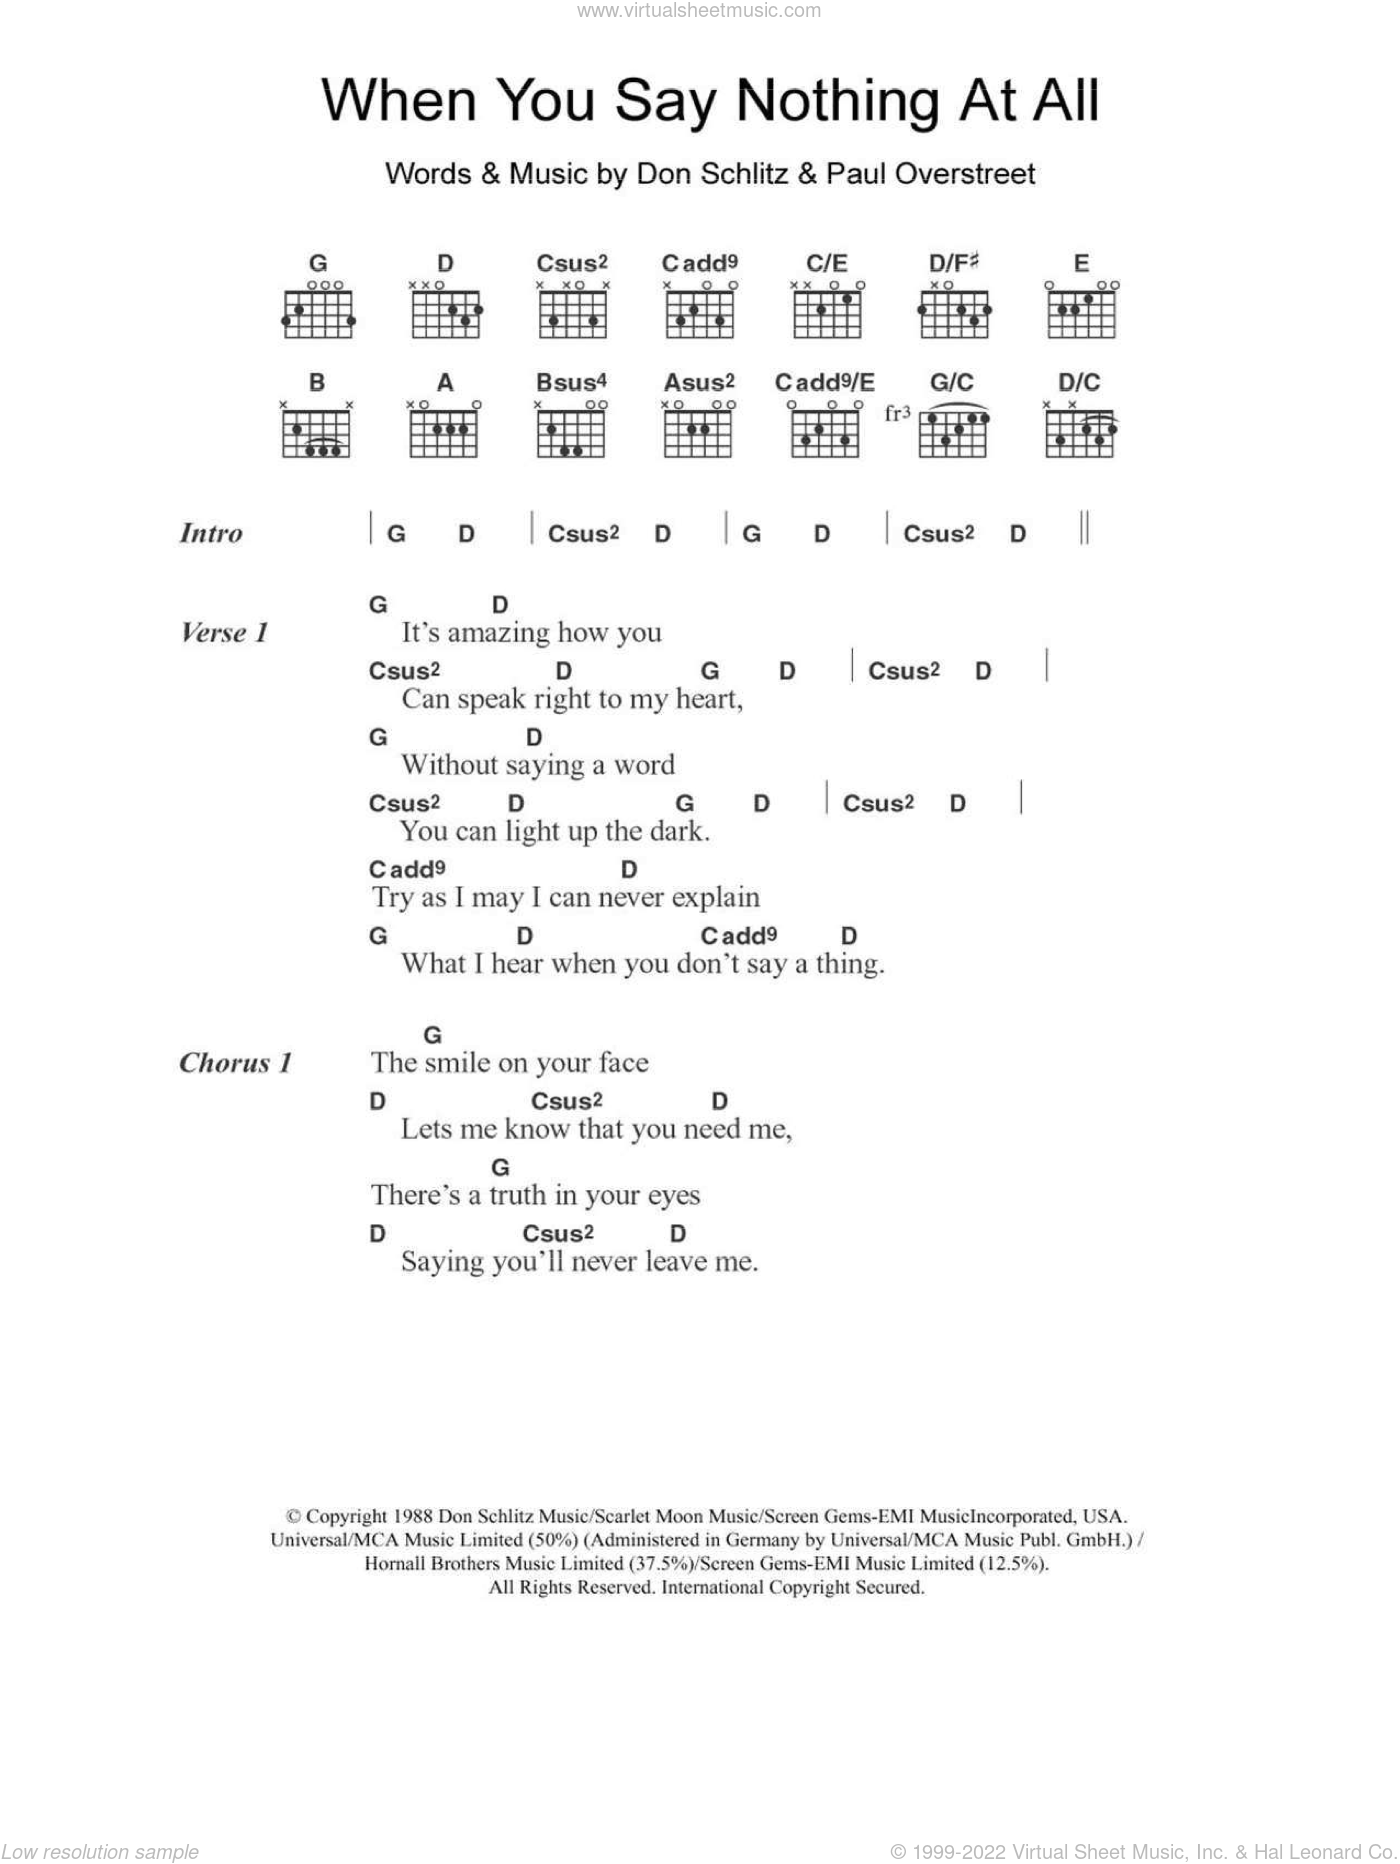 Keating - When You Say Nothing At All Sheet Music For Guitar (Chords)